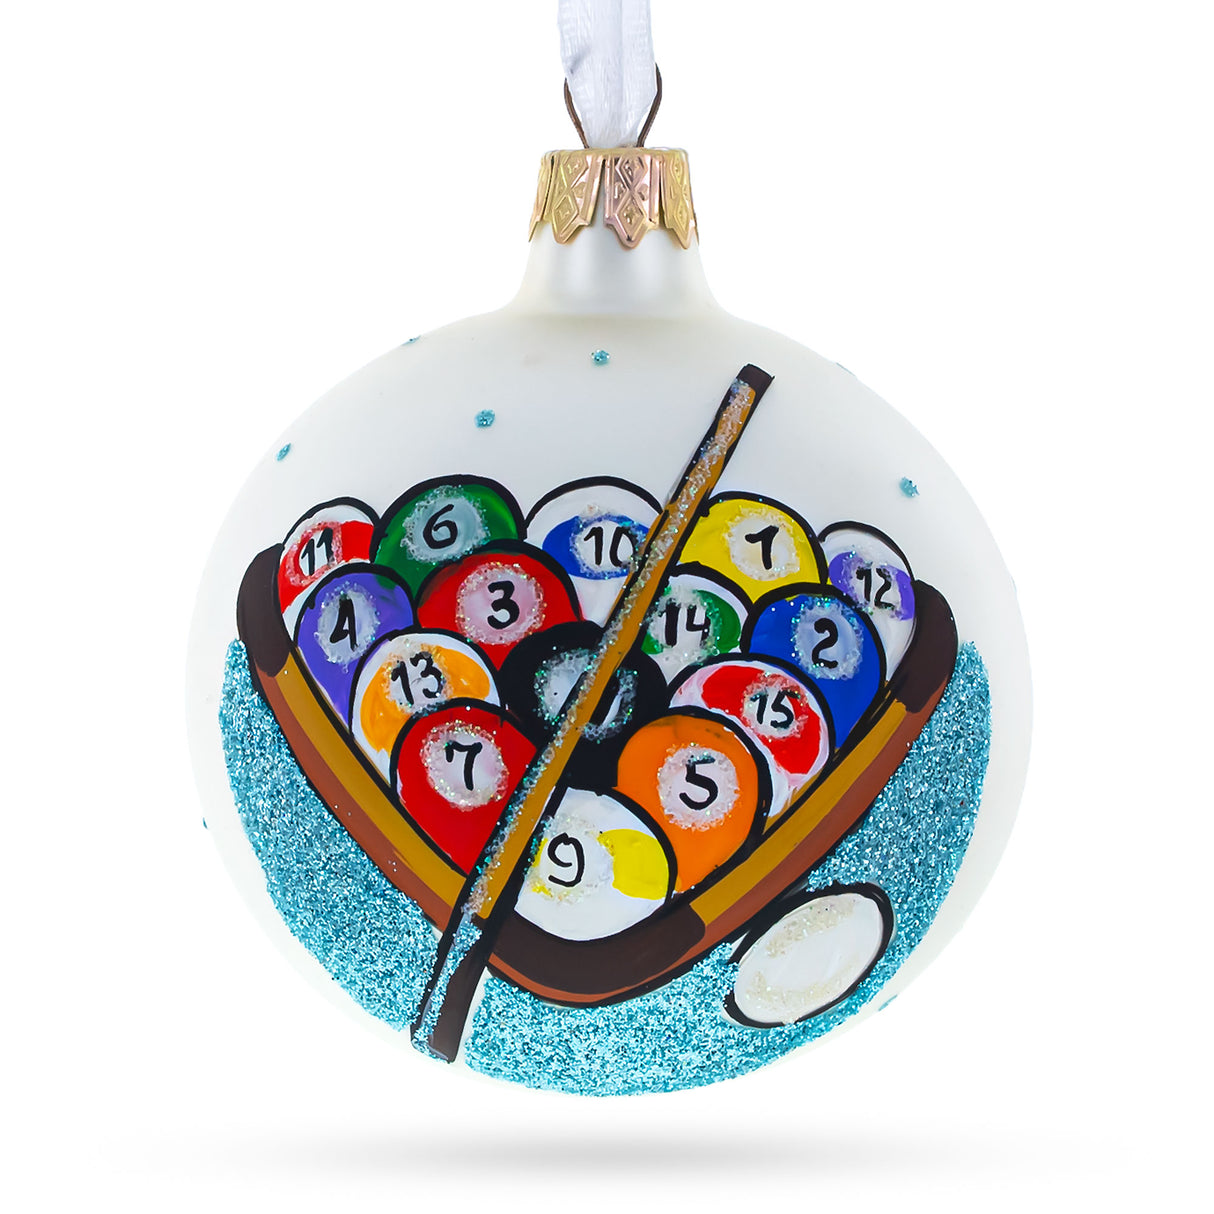 Glass Rack 'Em Up: I Love Pool / Billiard Blown Glass Christmas Ornament 3.25 Inches in White color Round